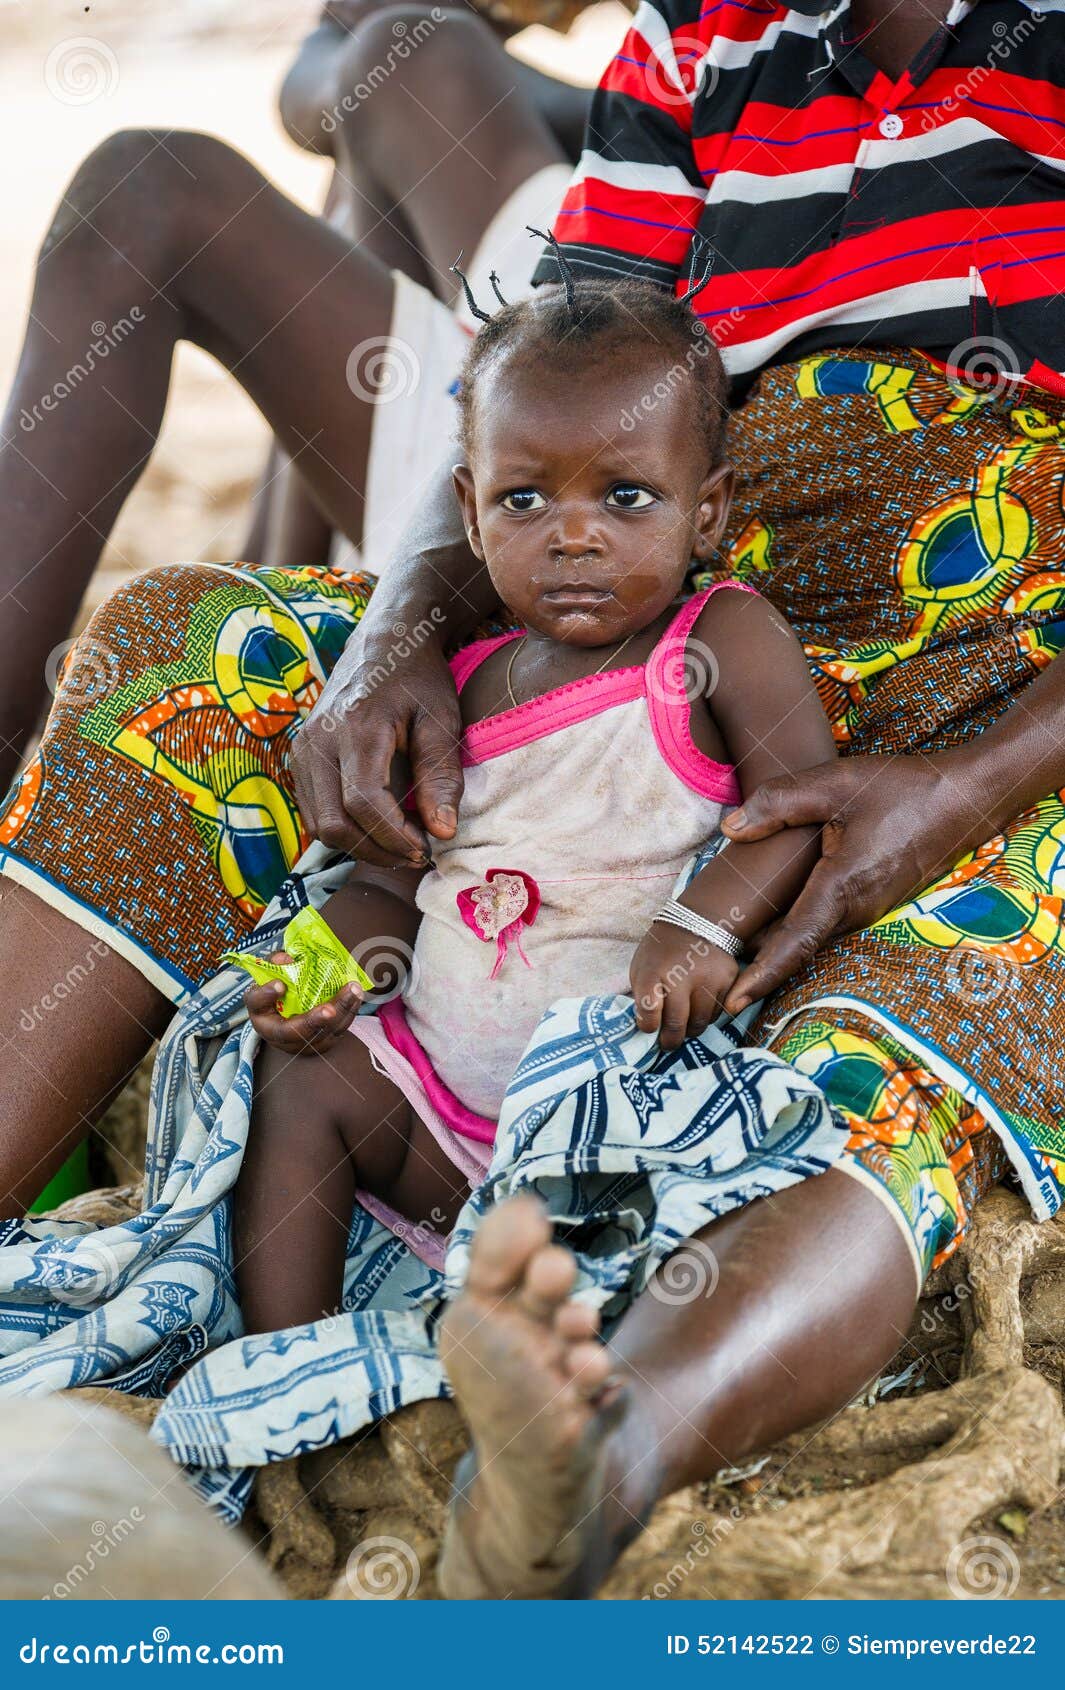 People in GHANA. ACCRA, GHANA - MARCH 6, 2012: Unidentified Ghanaian woman and her little baby sit near the tree in the street in Ghana. People of Ghana suffer of poverty due to the unstable economic situation